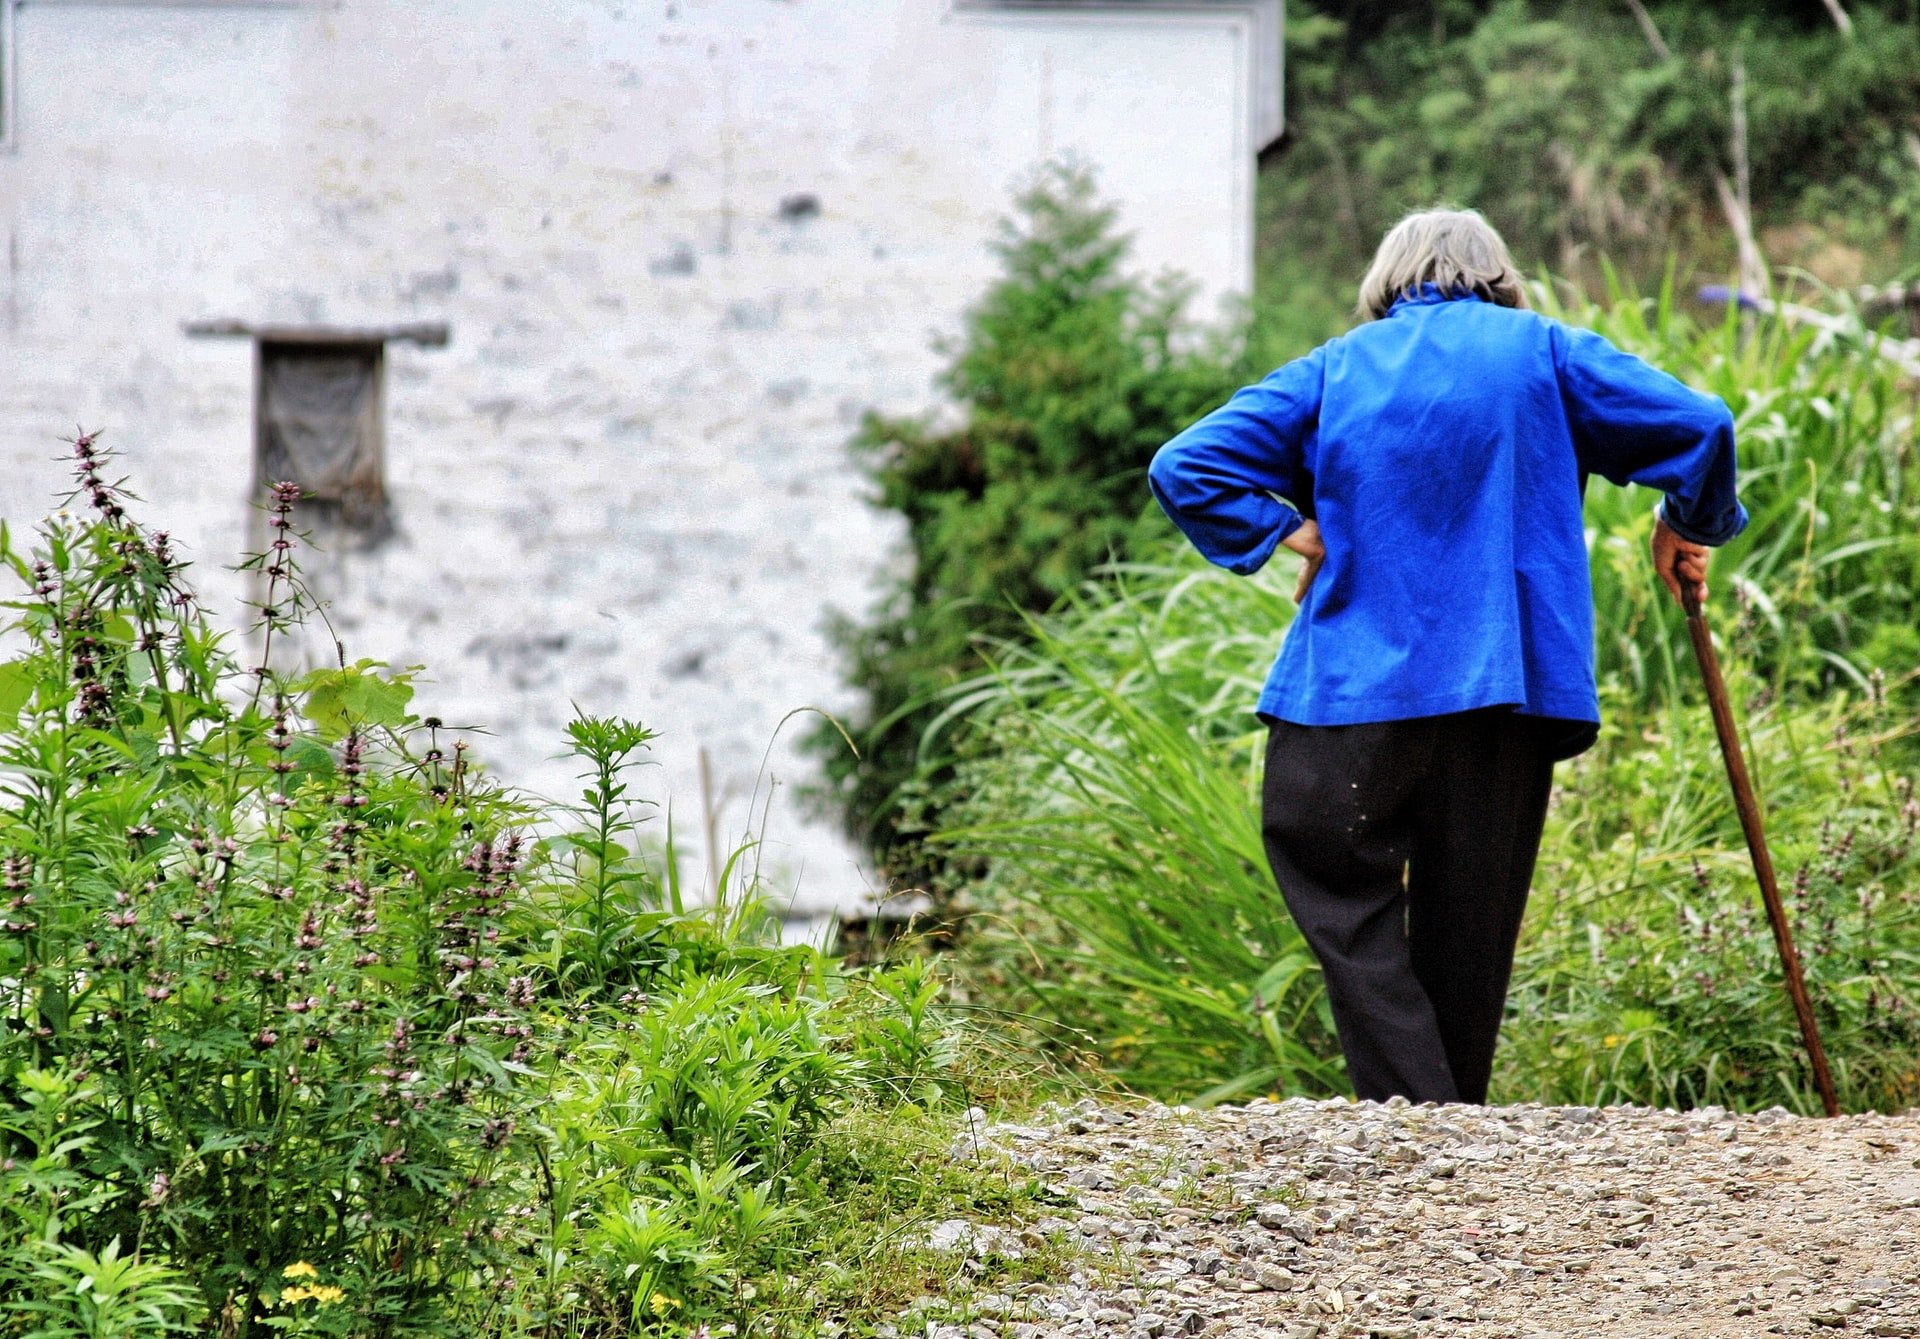 An older lady in a blue coat leaning on a cane with her back to us